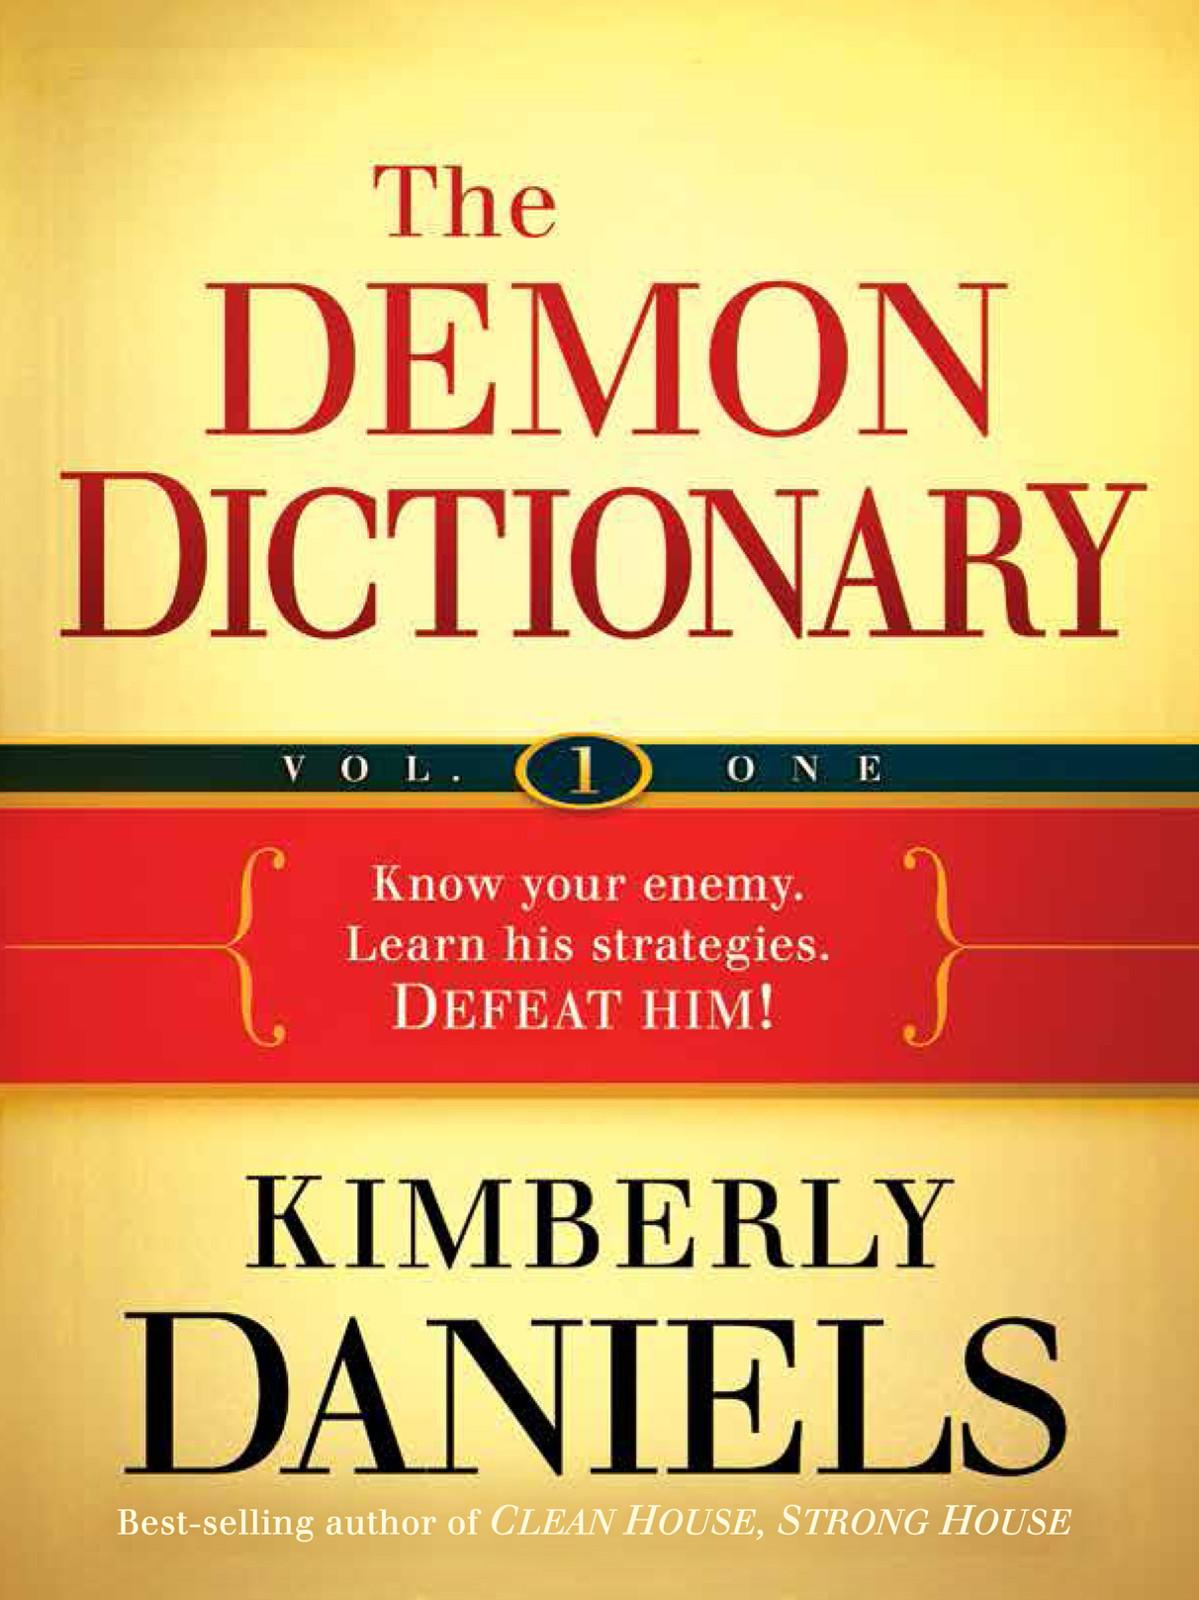 The Demon Dictionary Volume One: Know Your Enemy. Learn His Strategies. Defeat Him!